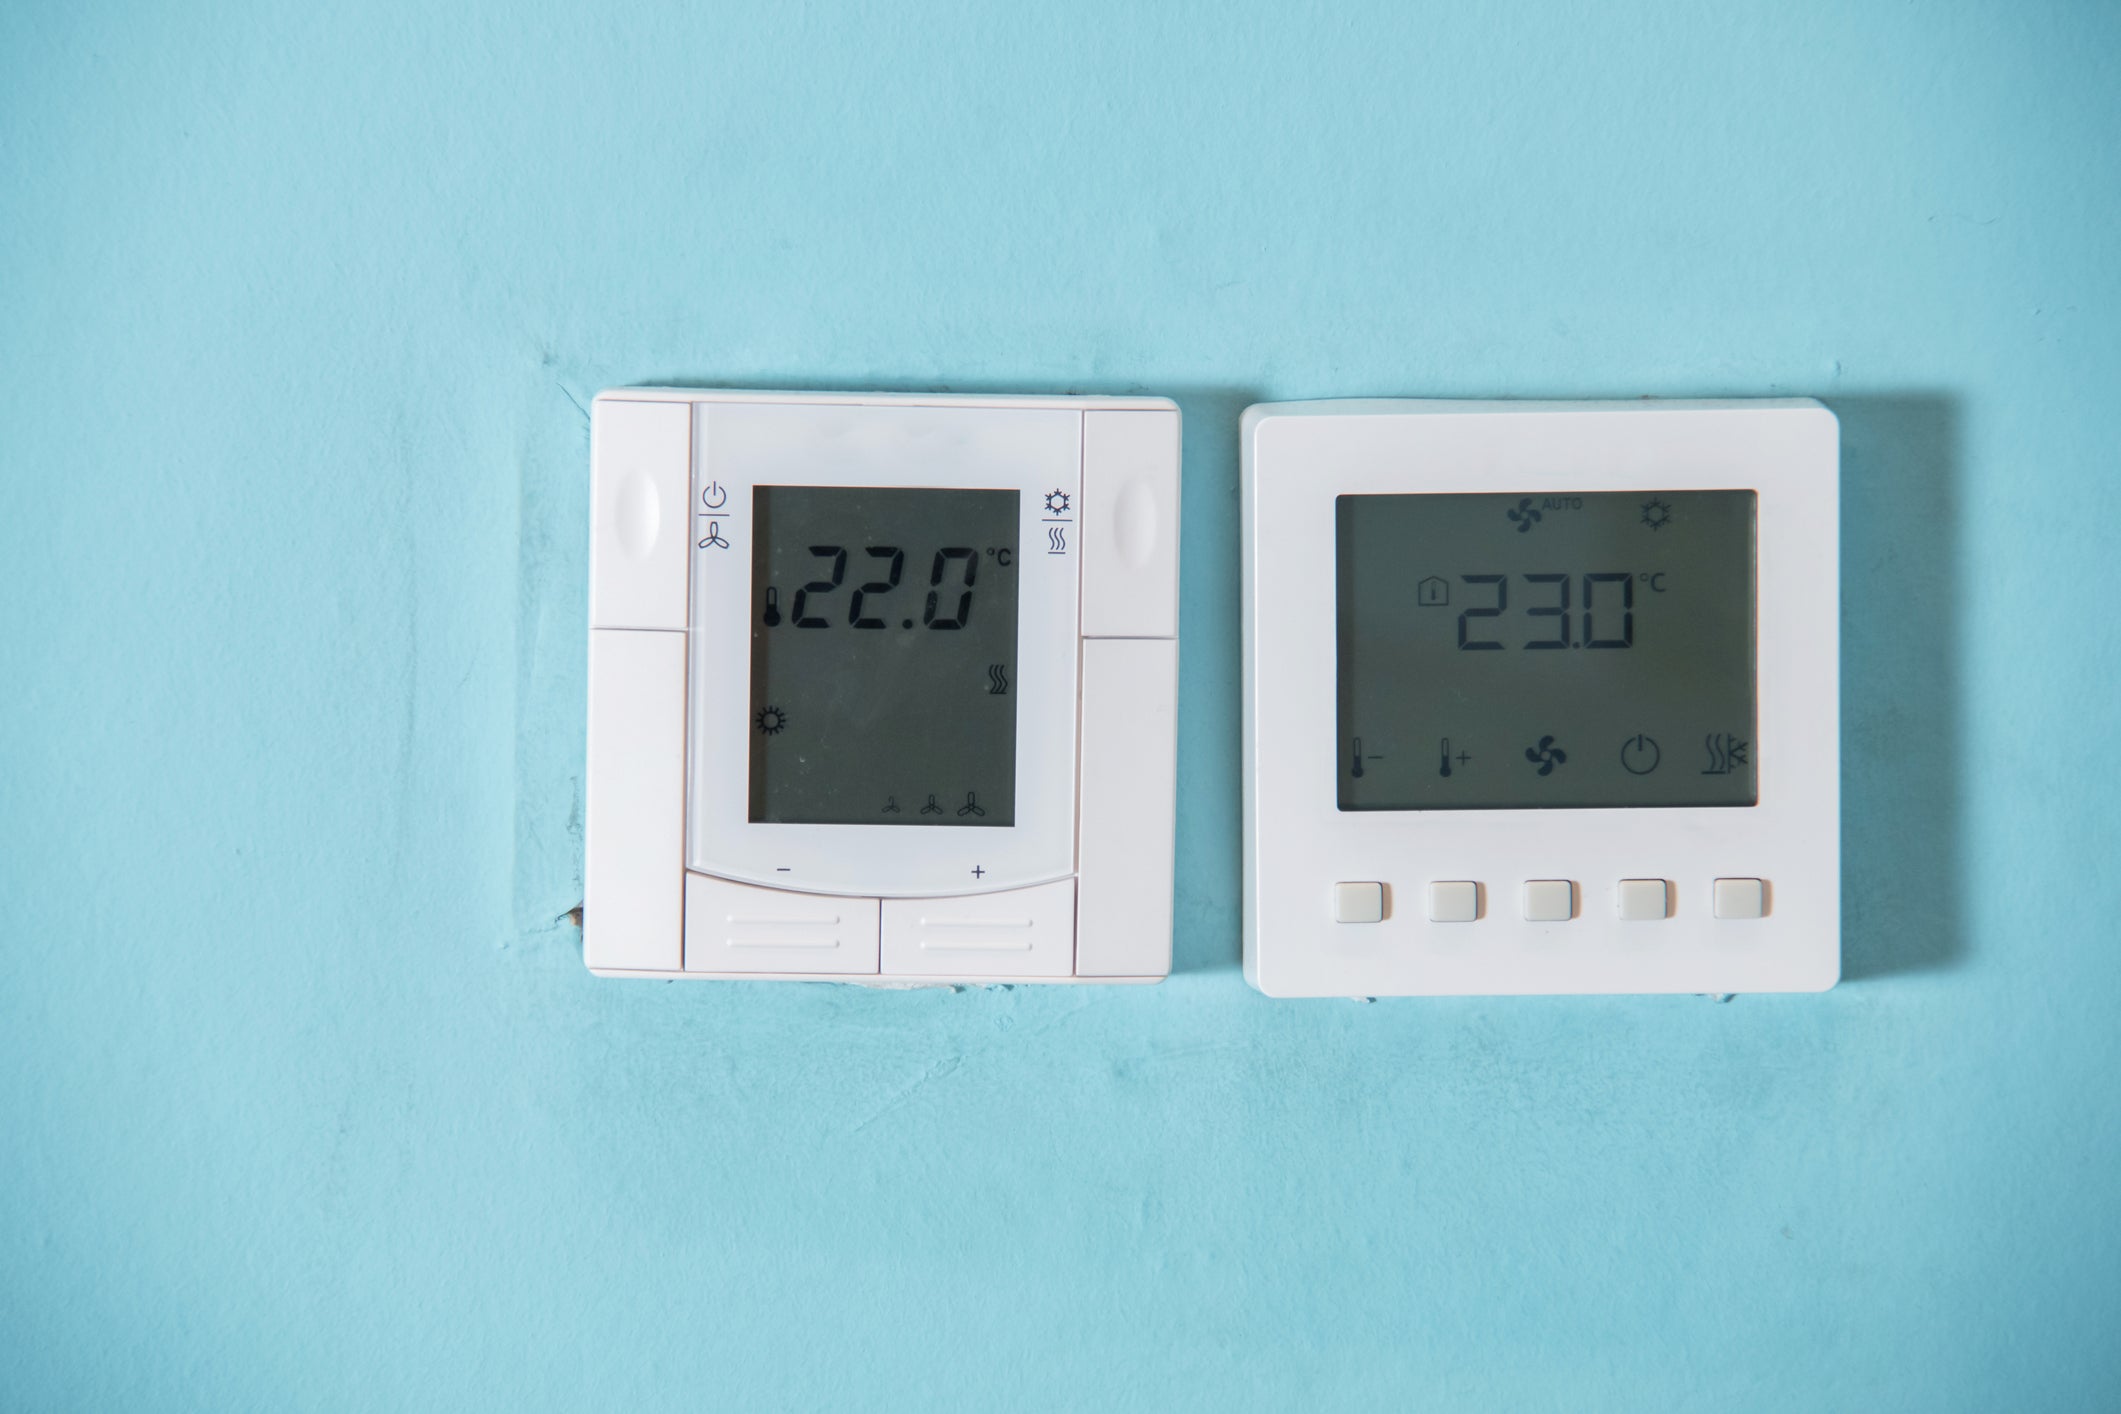 Hotel thermostat hacks to override your room temperature